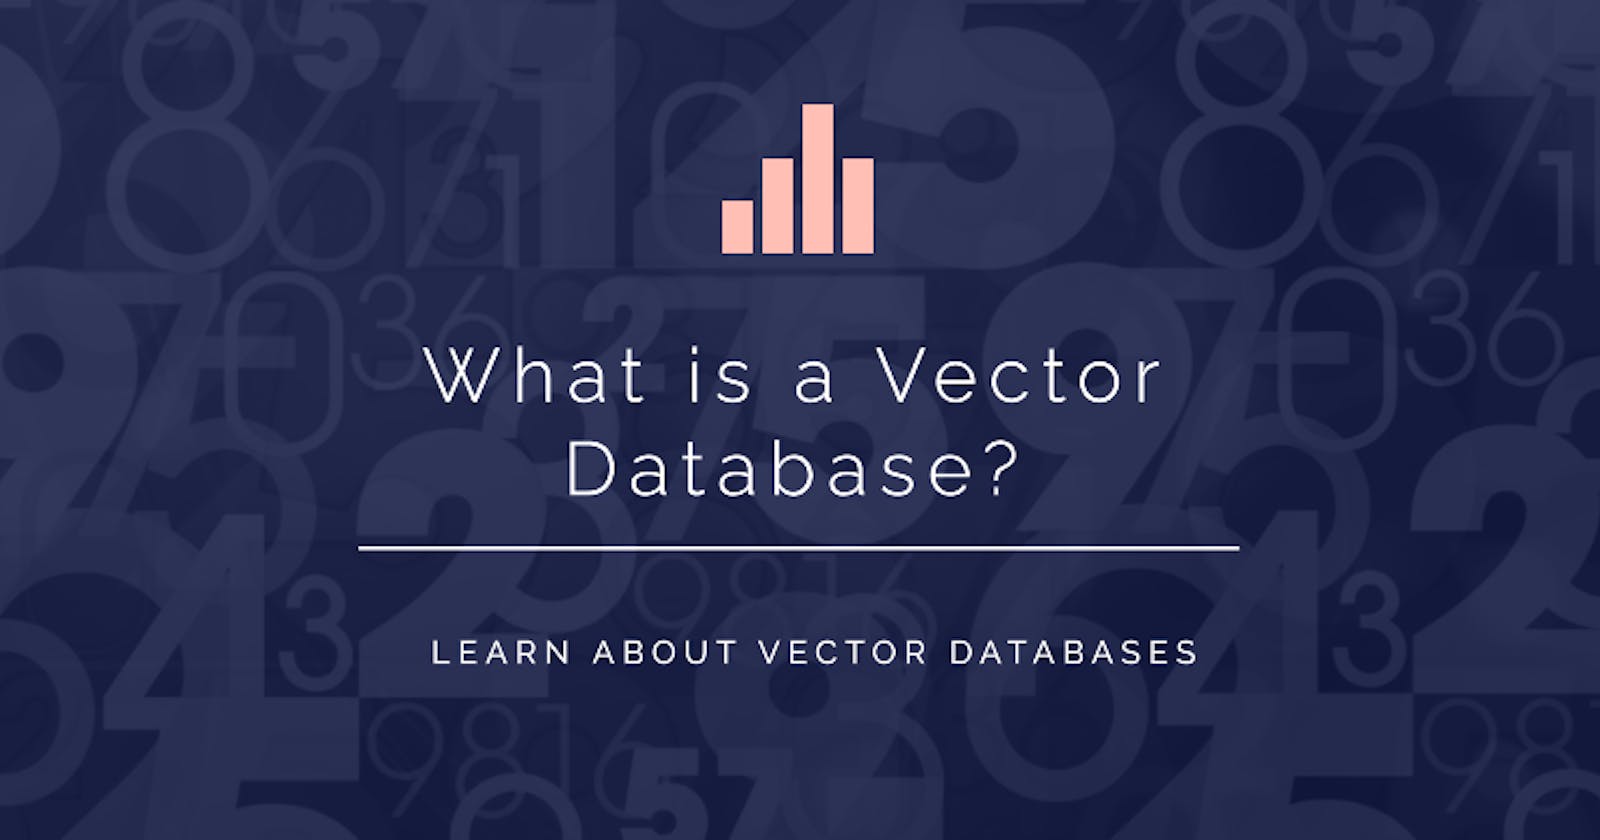 What is a Vector Database?